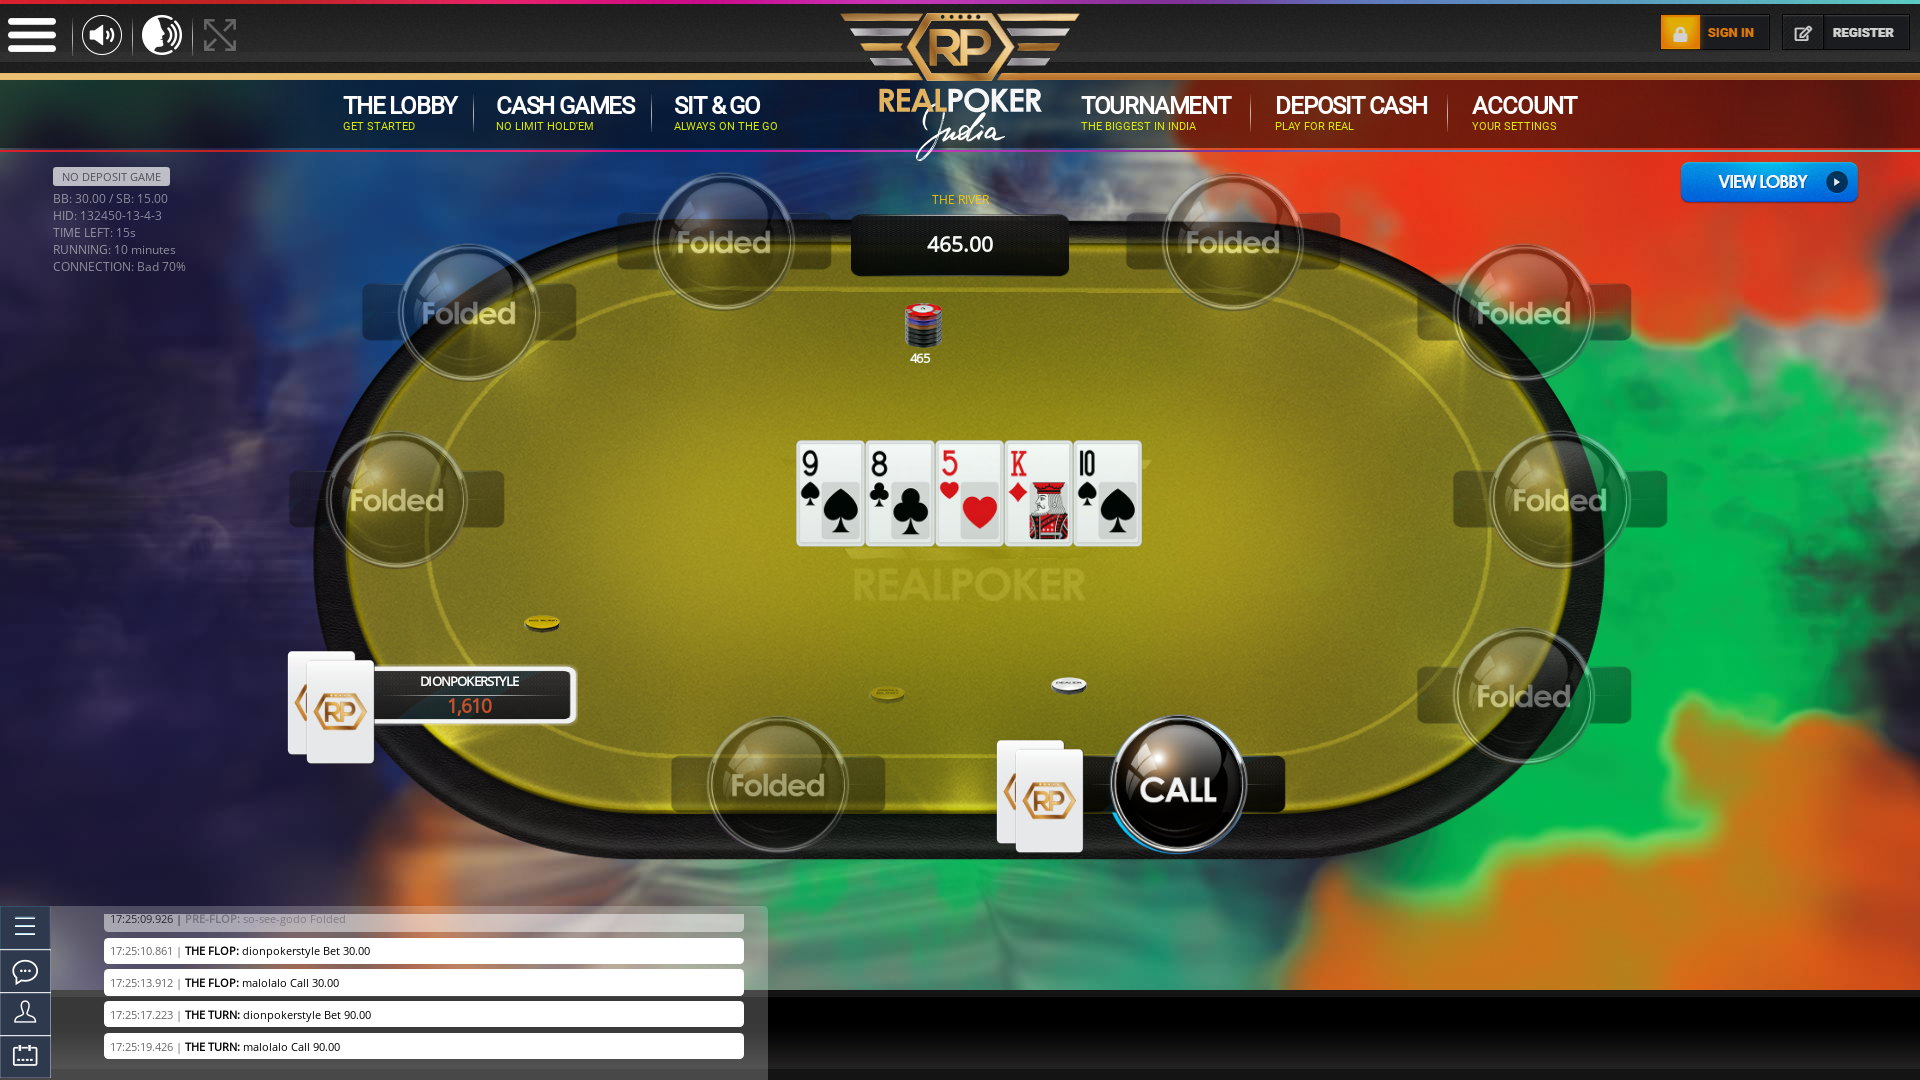 thatslife4 playing online poker on the Gurgaon table